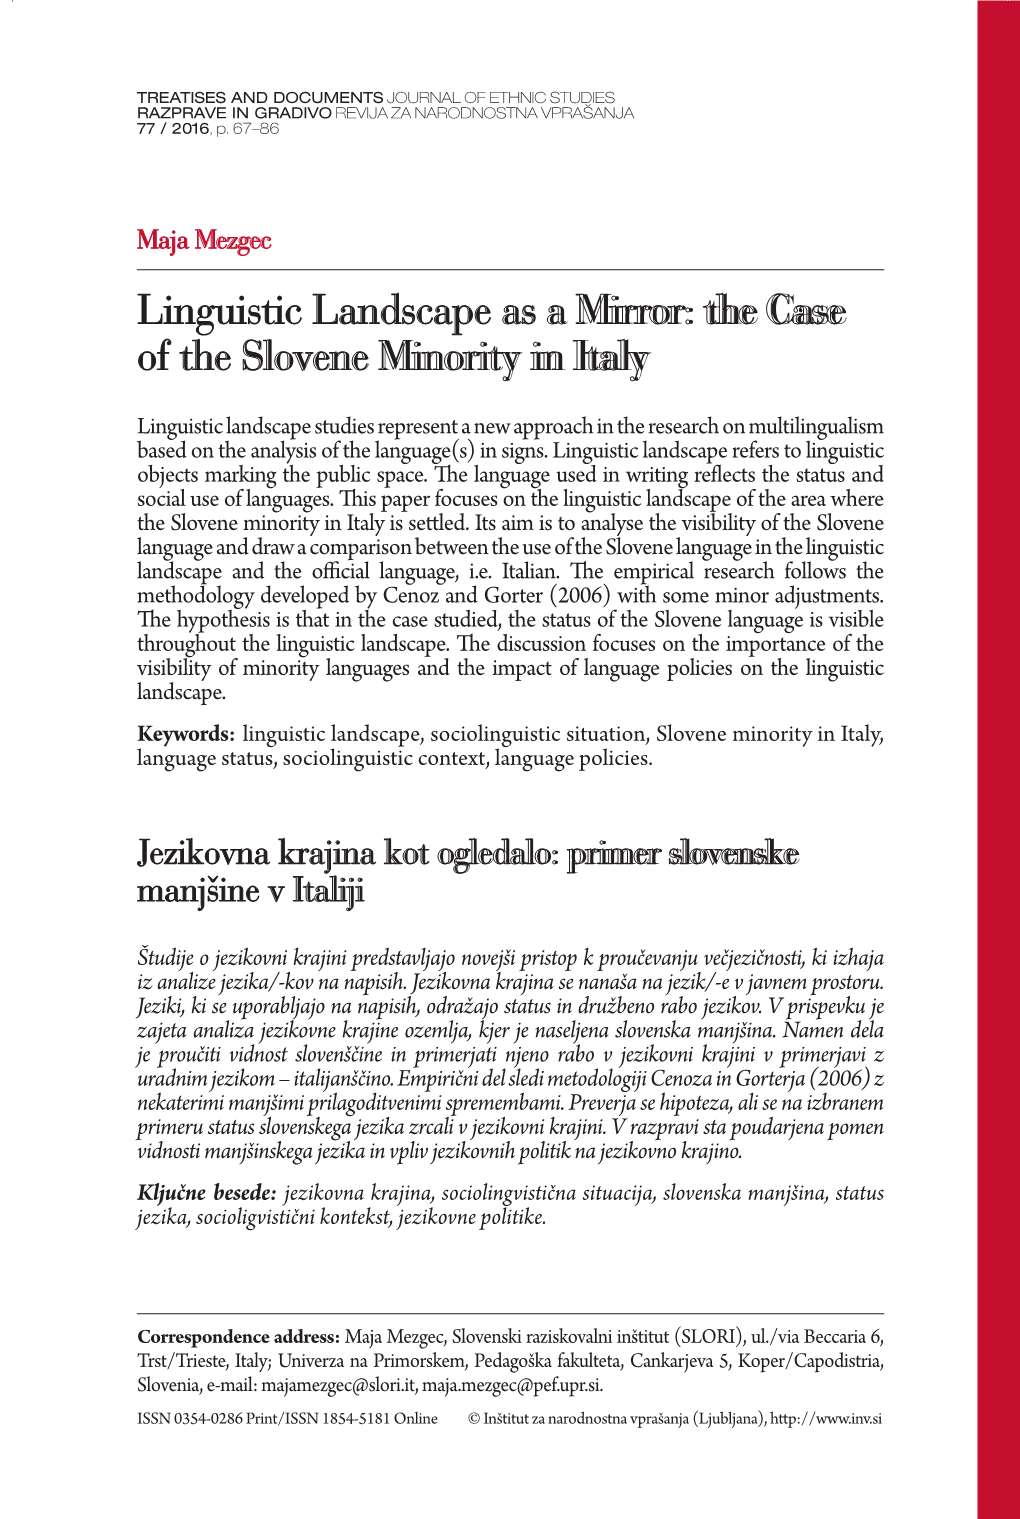 Linguistic Landscape As a Mirror: the Case of the Slovene Minority in Italy